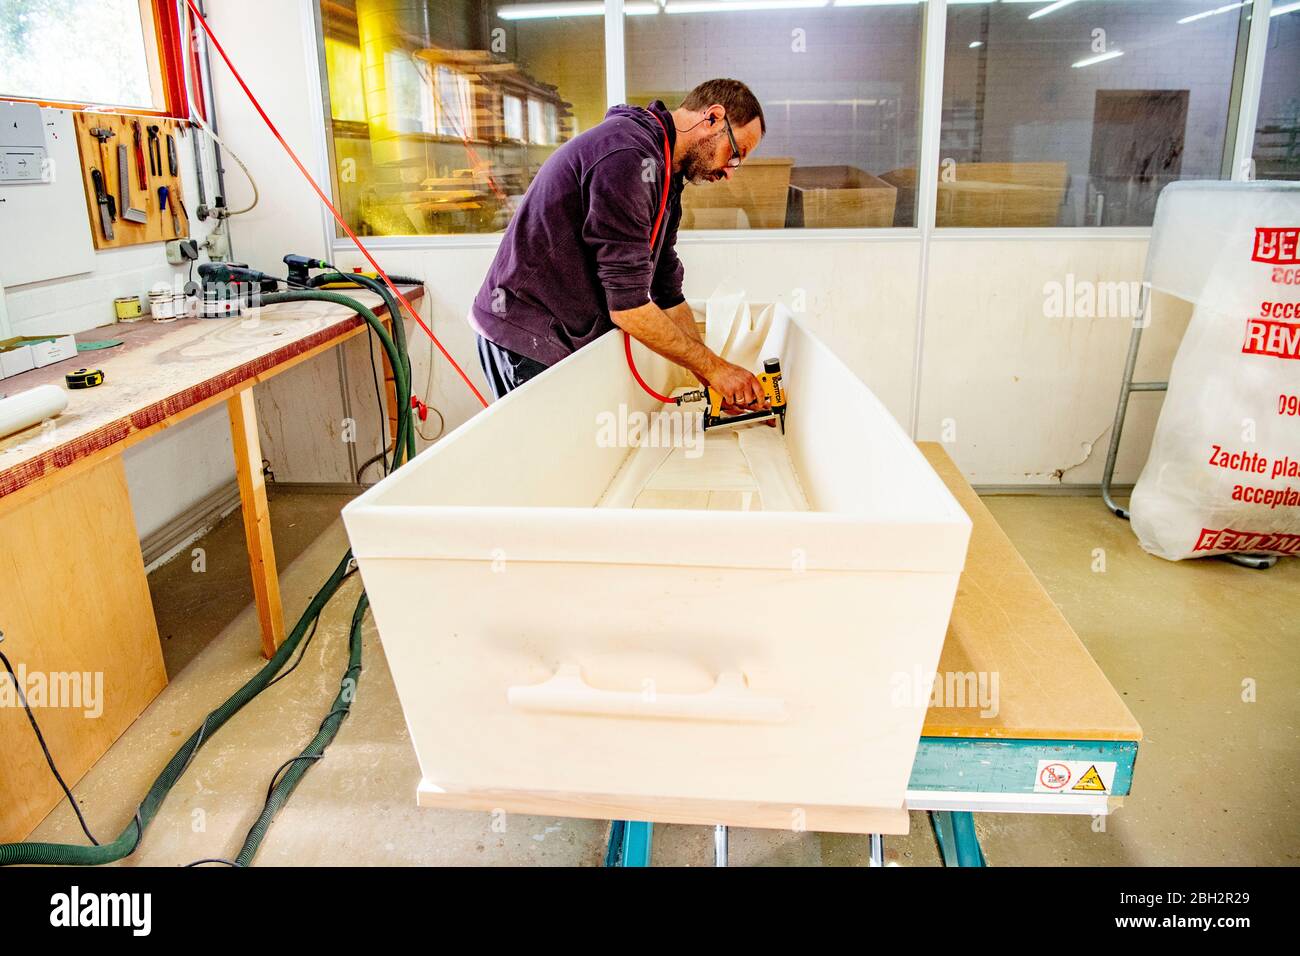 Gendringe, Netherlands. 23rd Apr, 2020. An employee making a casket at Tomba coffin maker.As the Coronavirus pandemic ravages Netherlands one coffin design firm south of Gendering has been busy delivering hundreds of caskets per week to double the usual production capacity. Coffin makers and the funeral industry at large are working hard. Credit: SOPA Images Limited/Alamy Live News Stock Photo